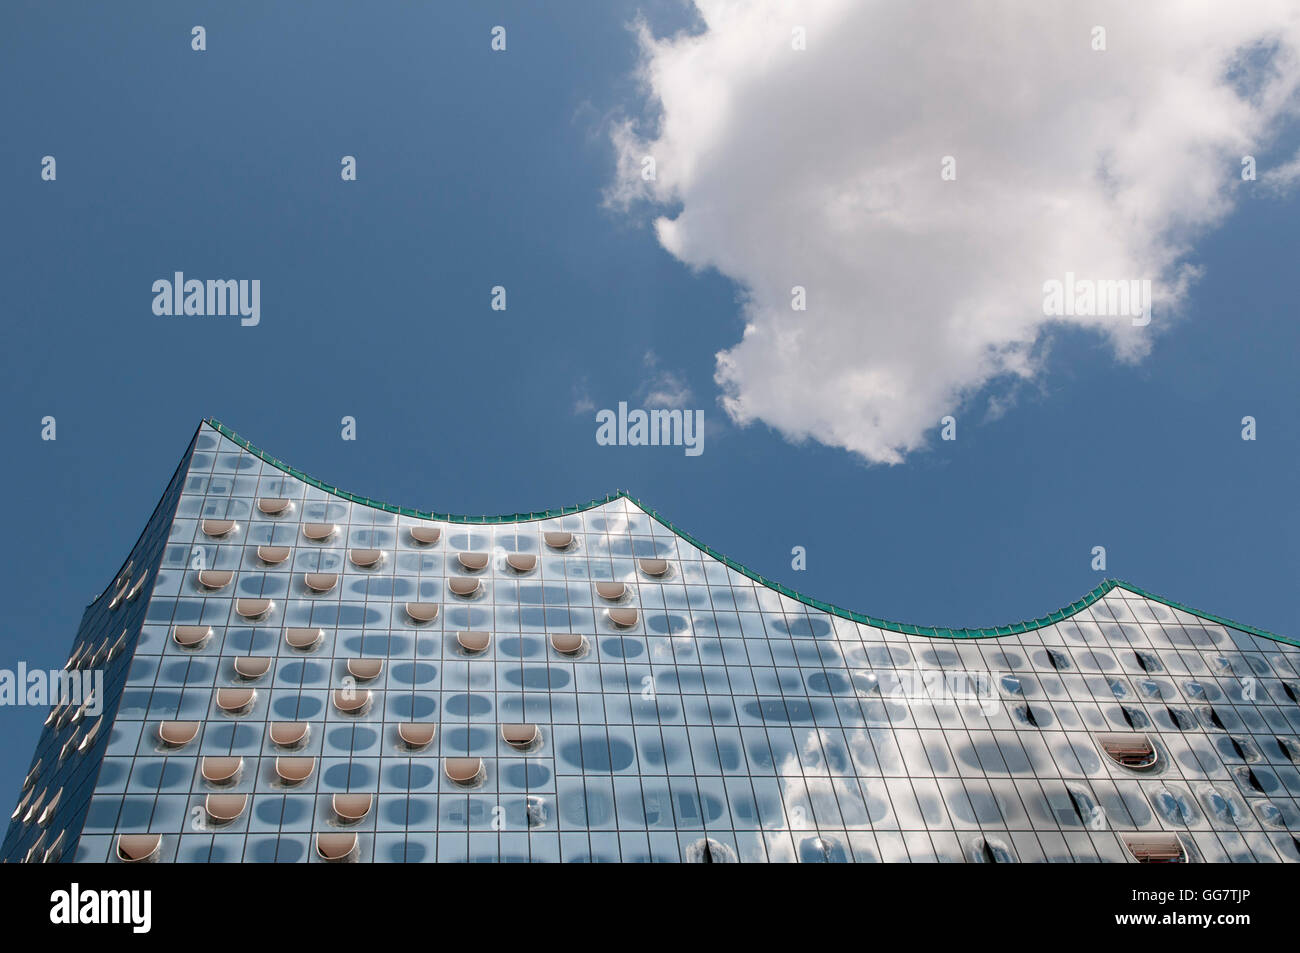 The Elbphilharmonie concert hall, Hamburg, Germany. Designed by architects Herzog & de Meuron. Detail of the glass facade. Stock Photo